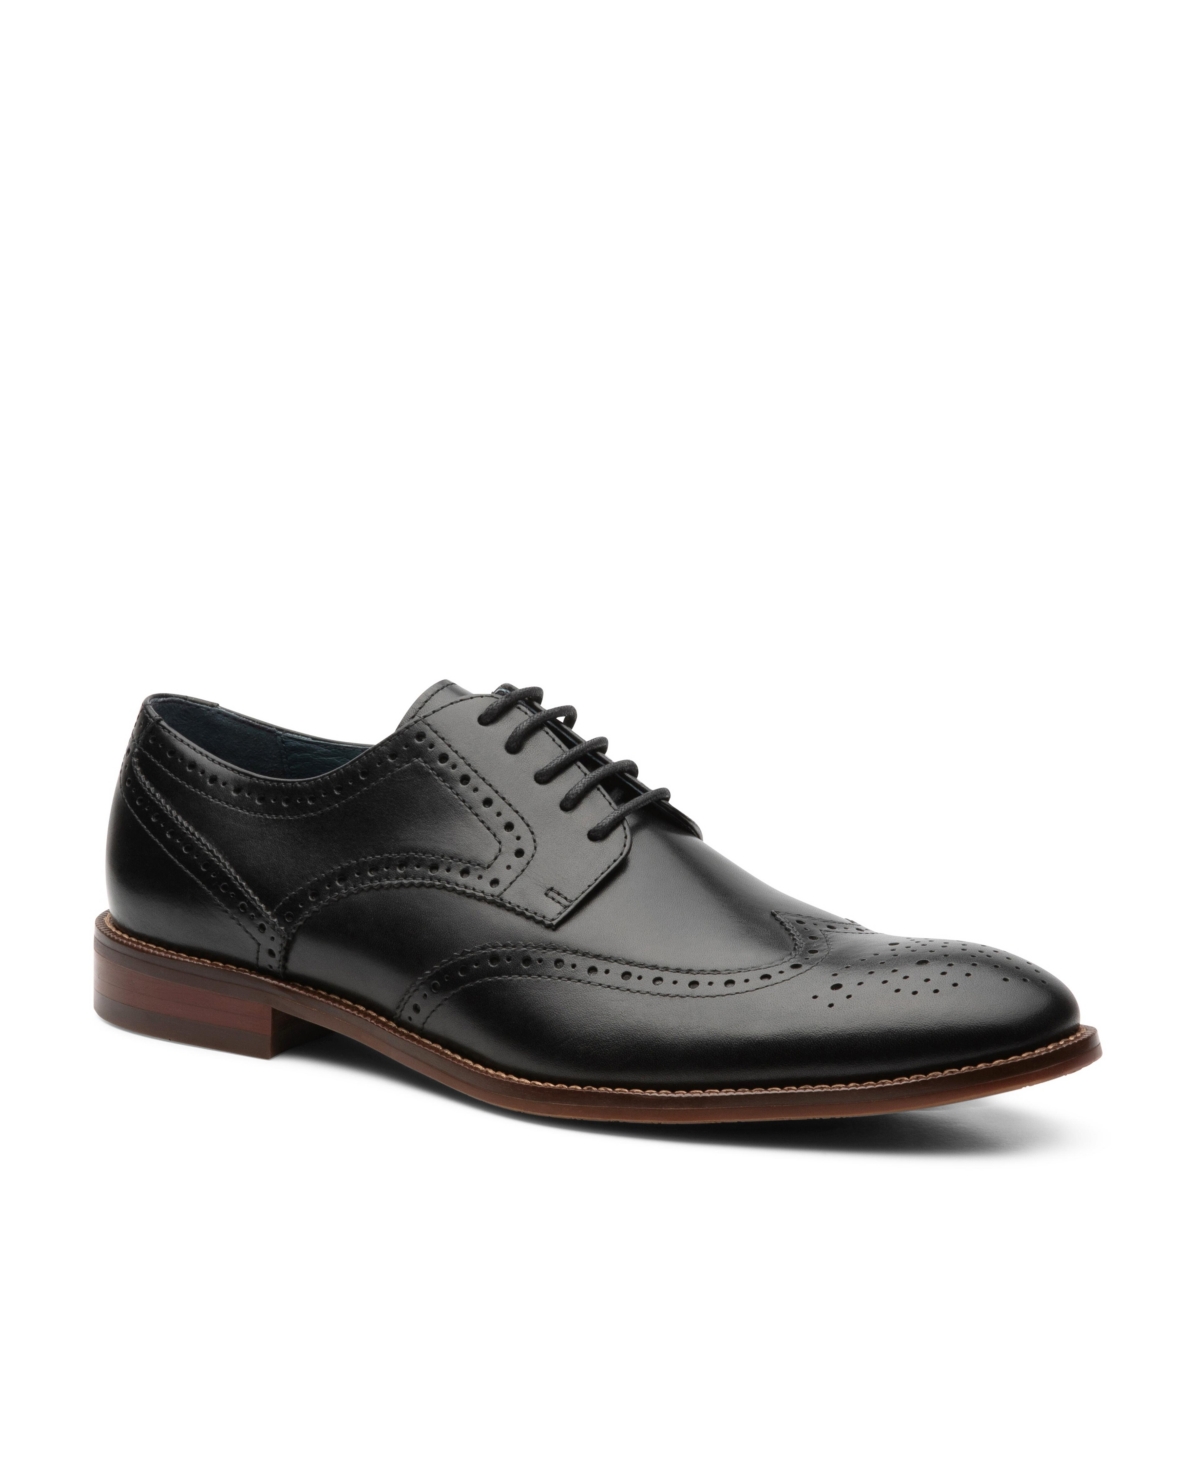 BLAKE MCKAY MEN'S MARSHALL DRESS LACE-UP WINGTIP LEATHER SHOES